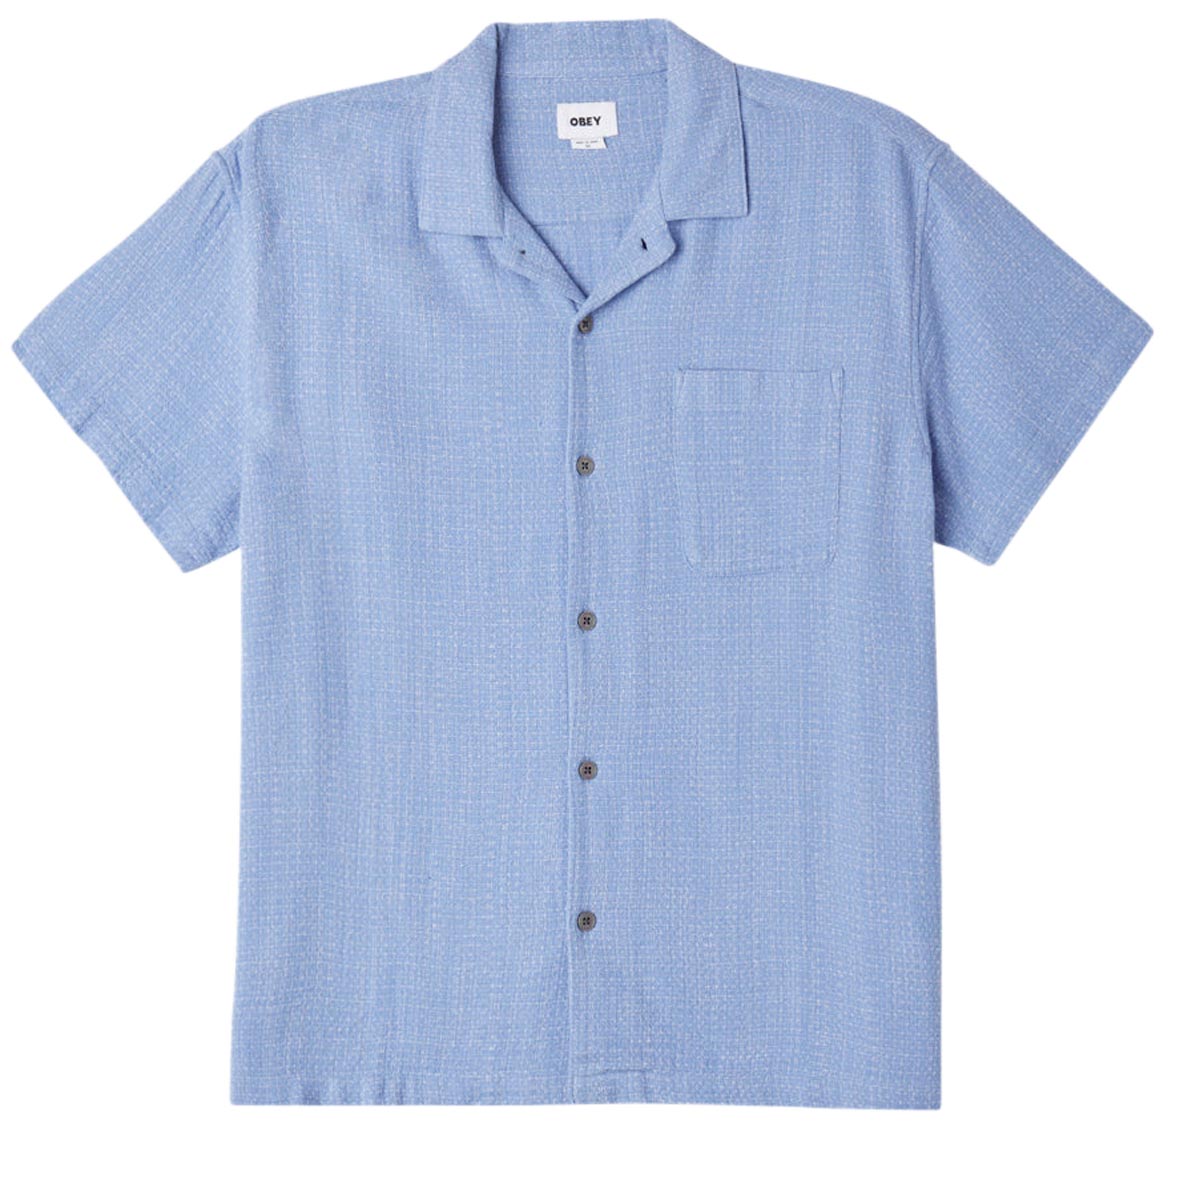 Obey Feather Woven Shirt - Hydrangea image 1